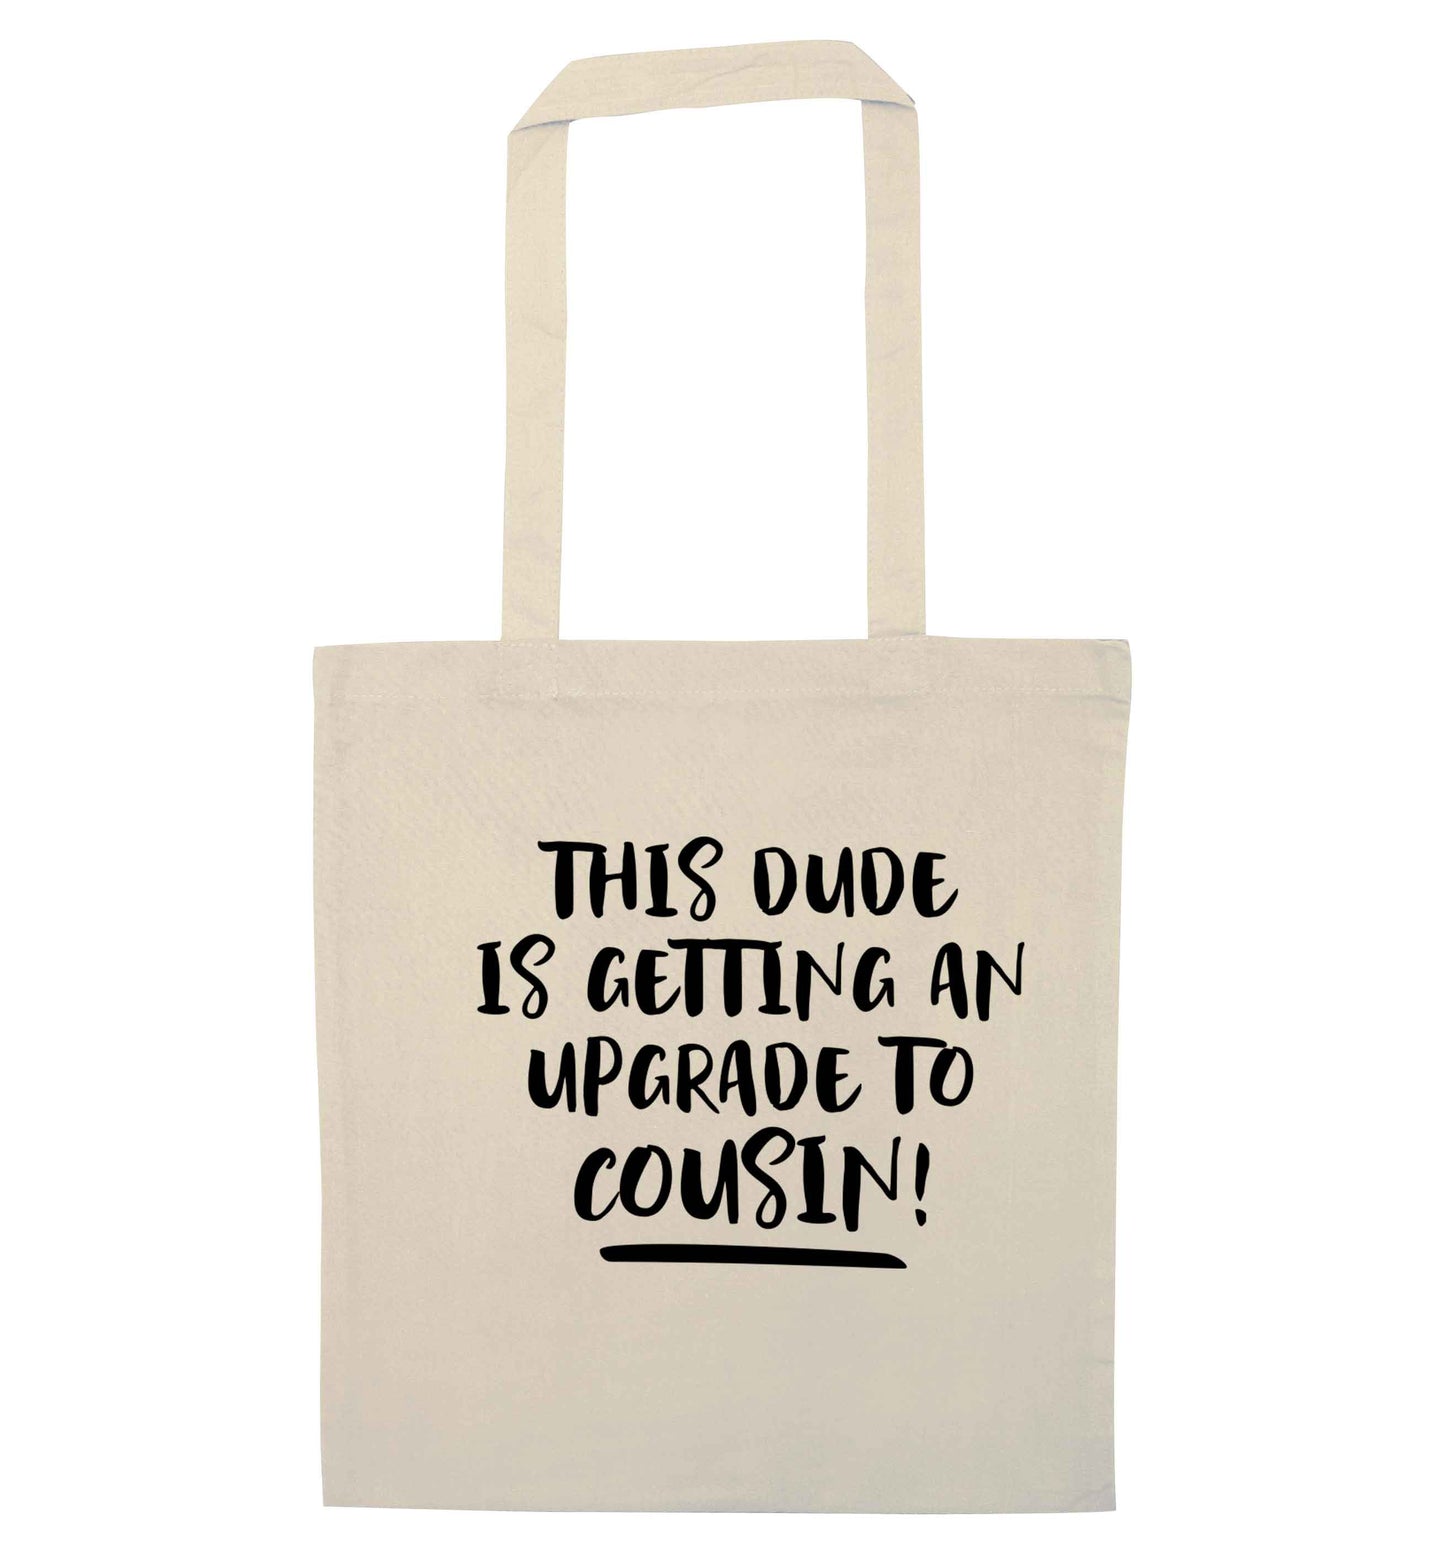 This dude is getting an upgrade to cousin! natural tote bag